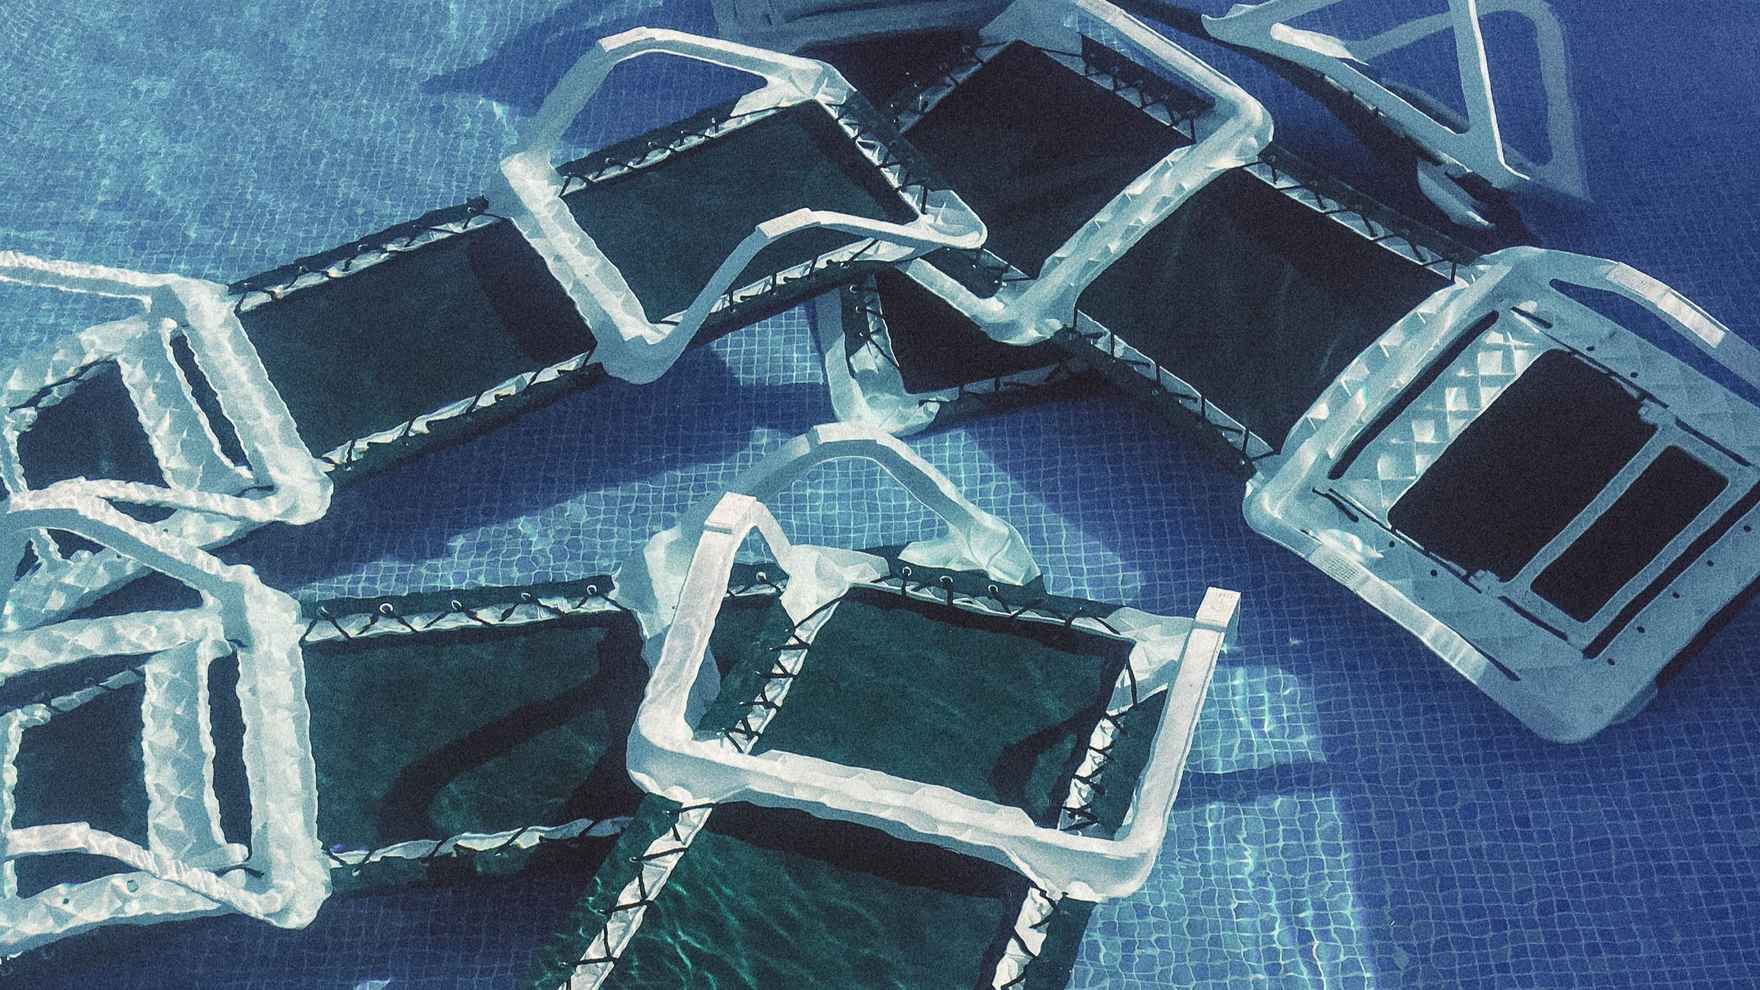 oops-chairs-in-pool-edited